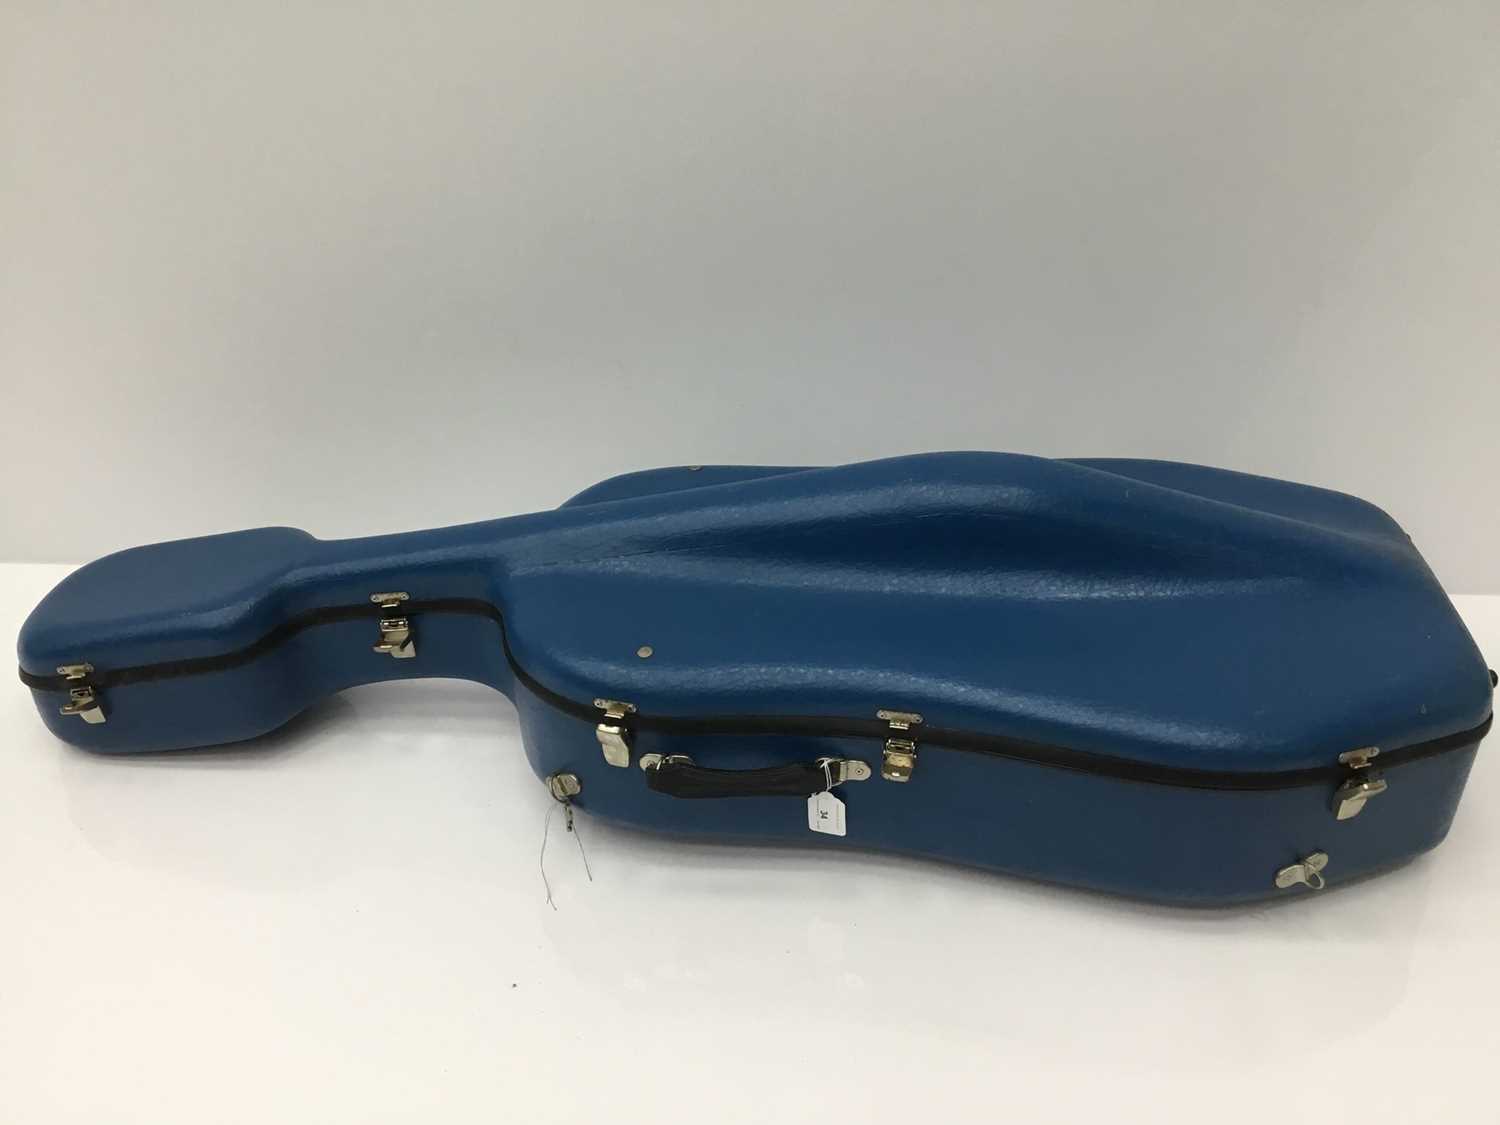 Cello case by Paxman Ltd, with blue finish, internal measurement approximately 132cm - Image 2 of 4